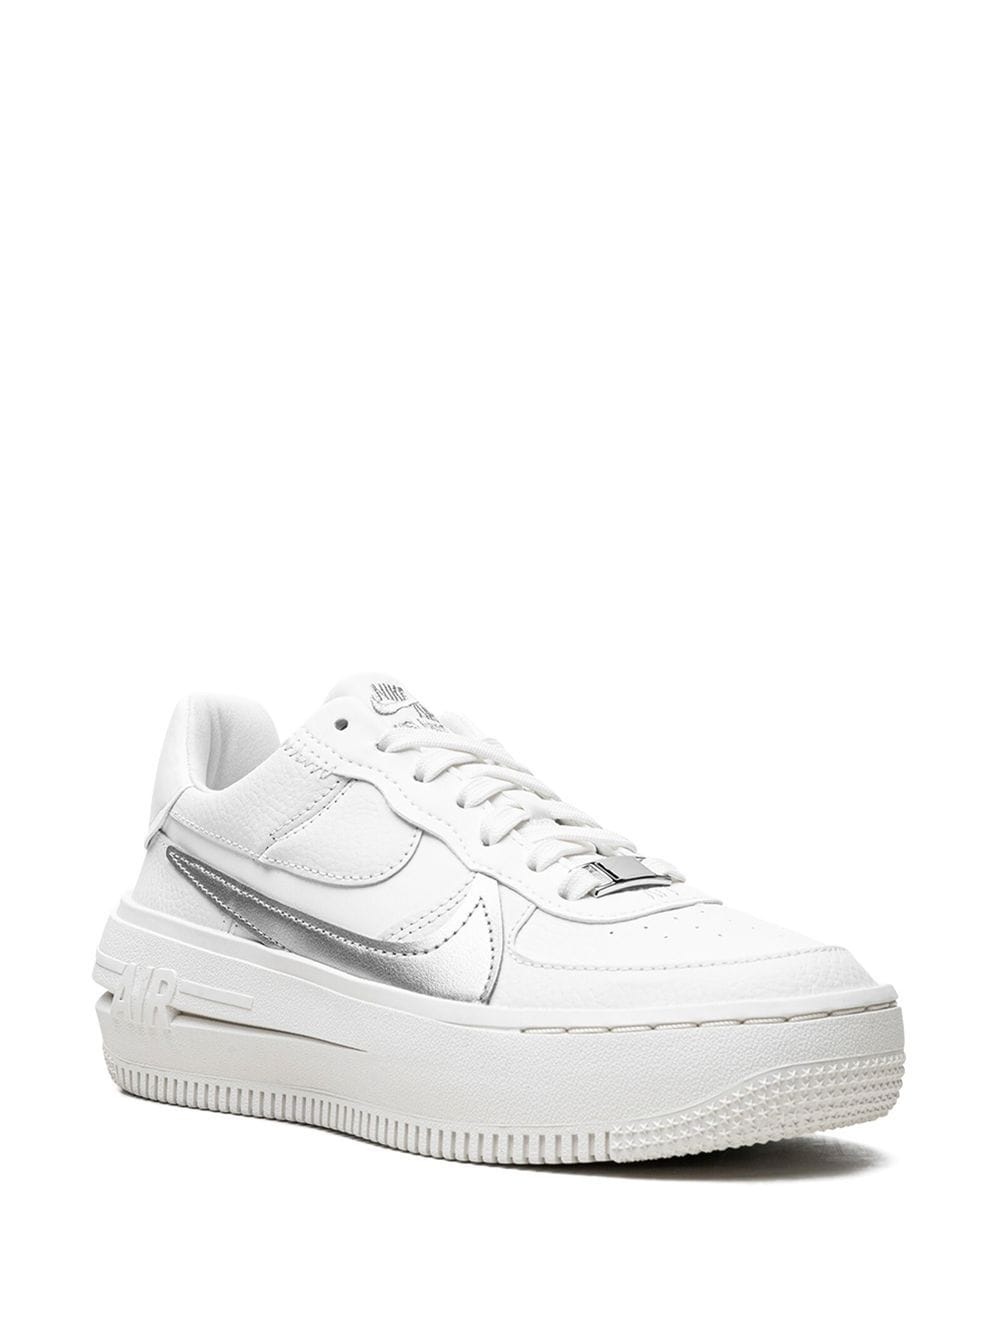 Air Force 1 PLT.AF.ORM "Summit White/Sail/Wolf Gray/Me" sneakers - 2